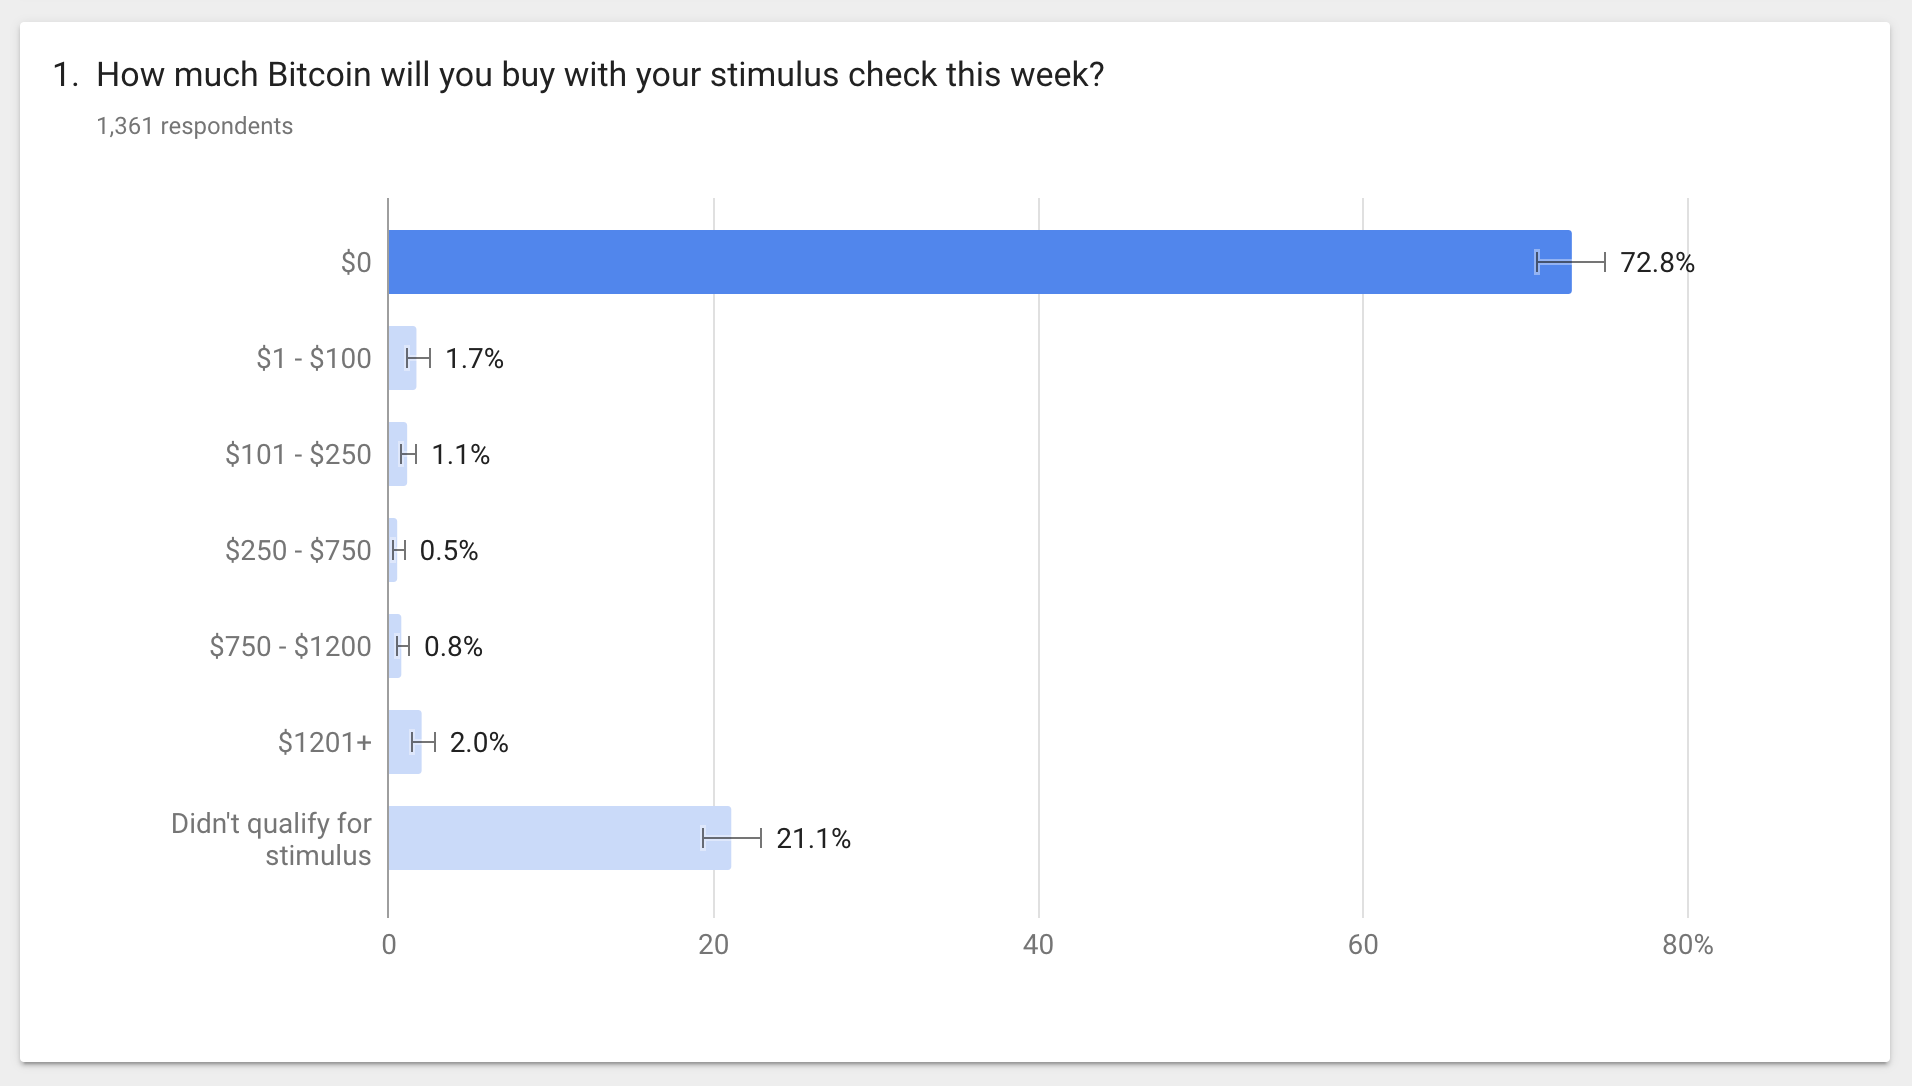 Survey results as of 3/21